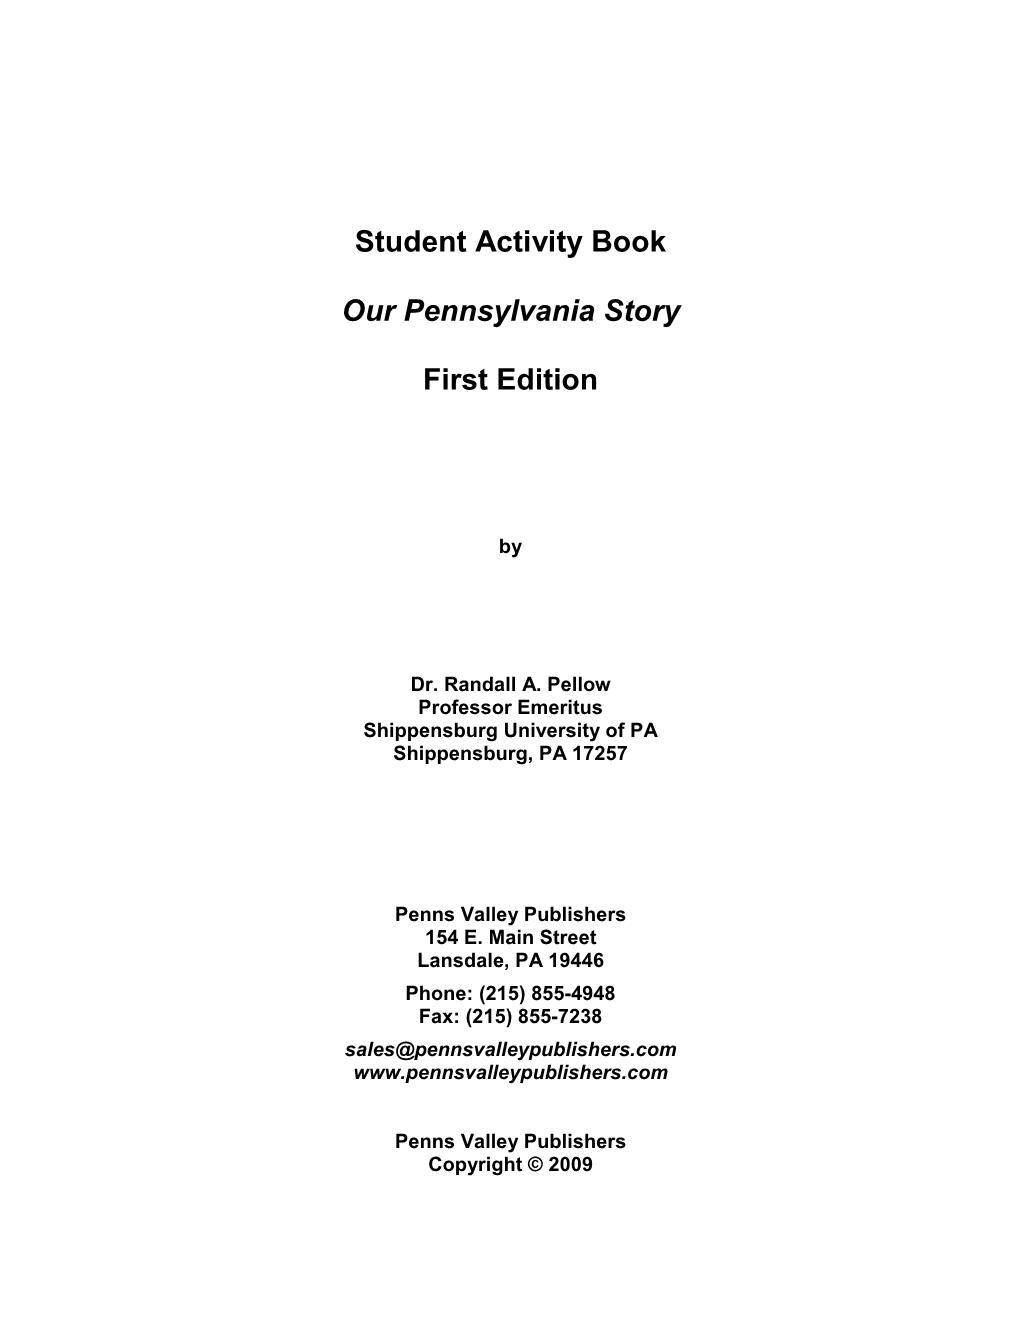 Student Activity Book Our Pennsylvania Story First Edition